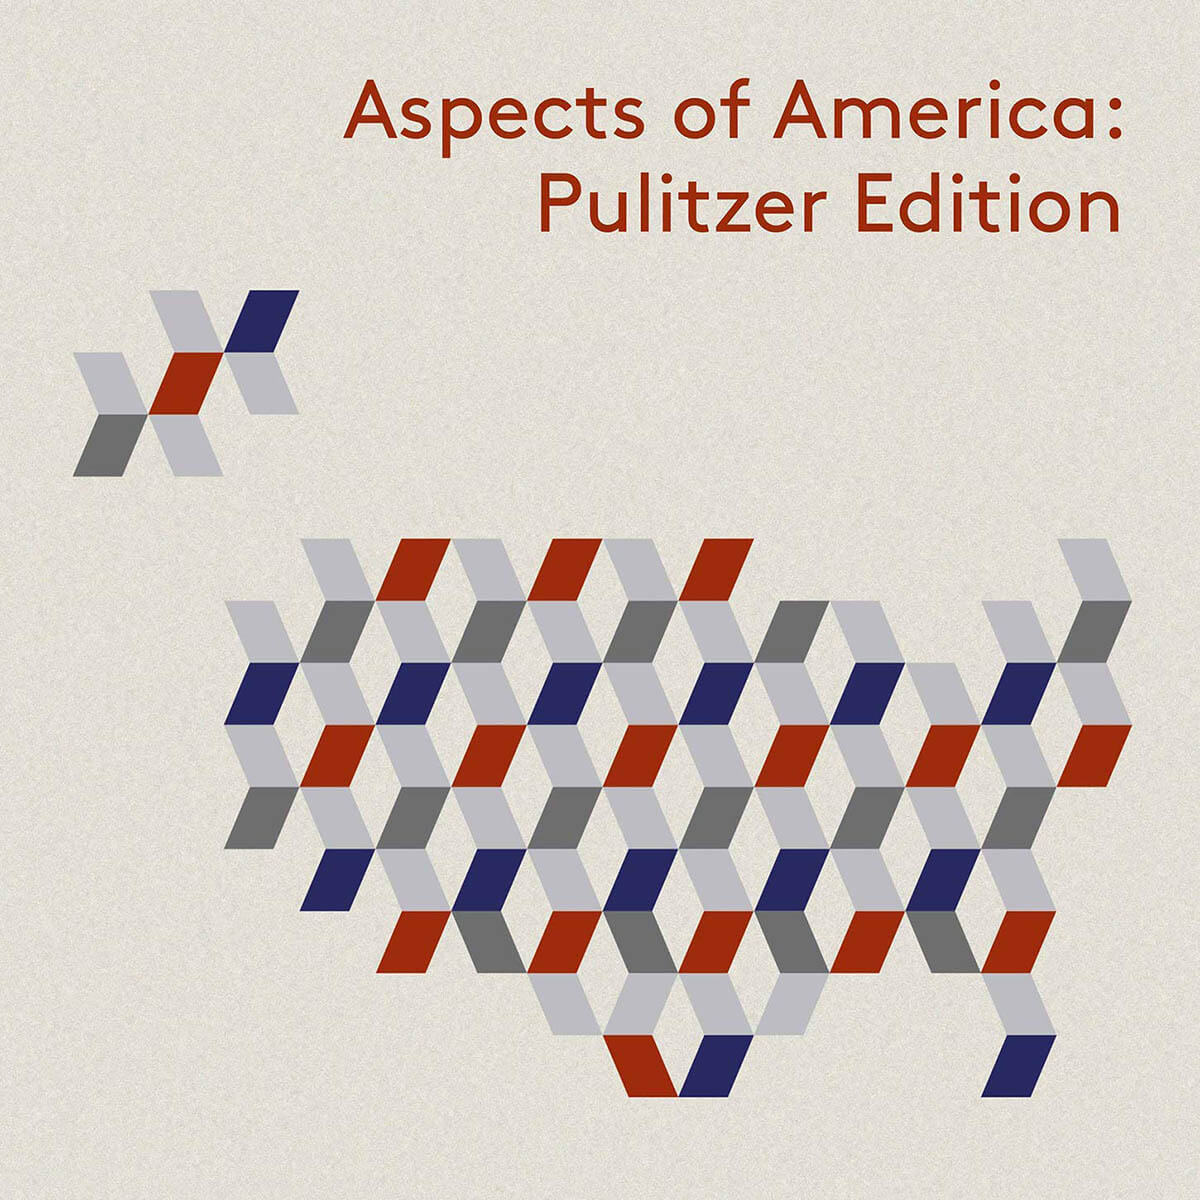 Aspects of America: Pulitzer Edition